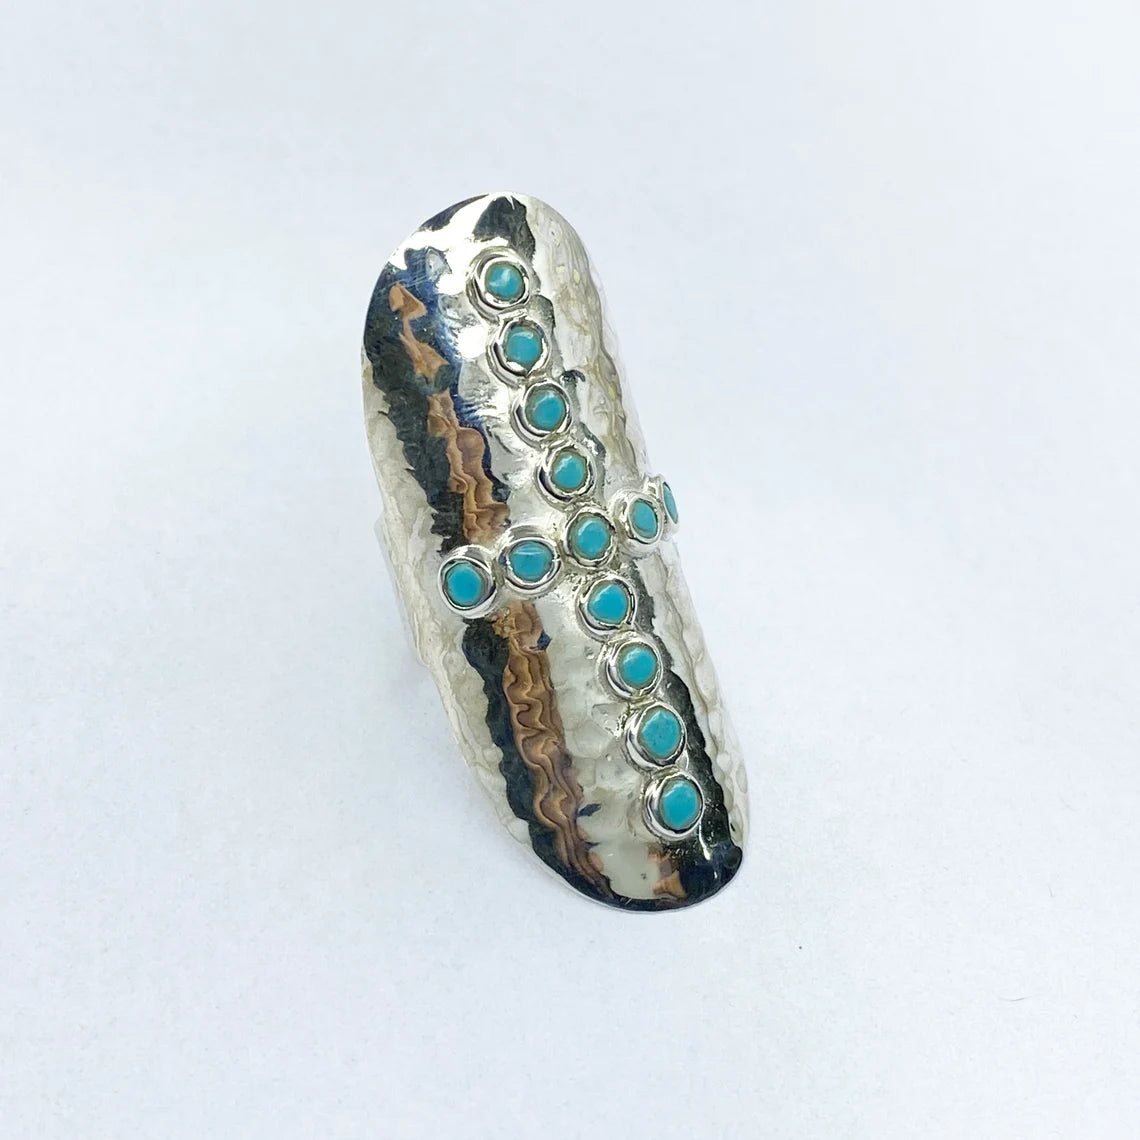 Extremely Large and Original Silver Bohemian Ring, Turquoise Cross Ring, Turquoise Cross 925 Sterling Silver Rii